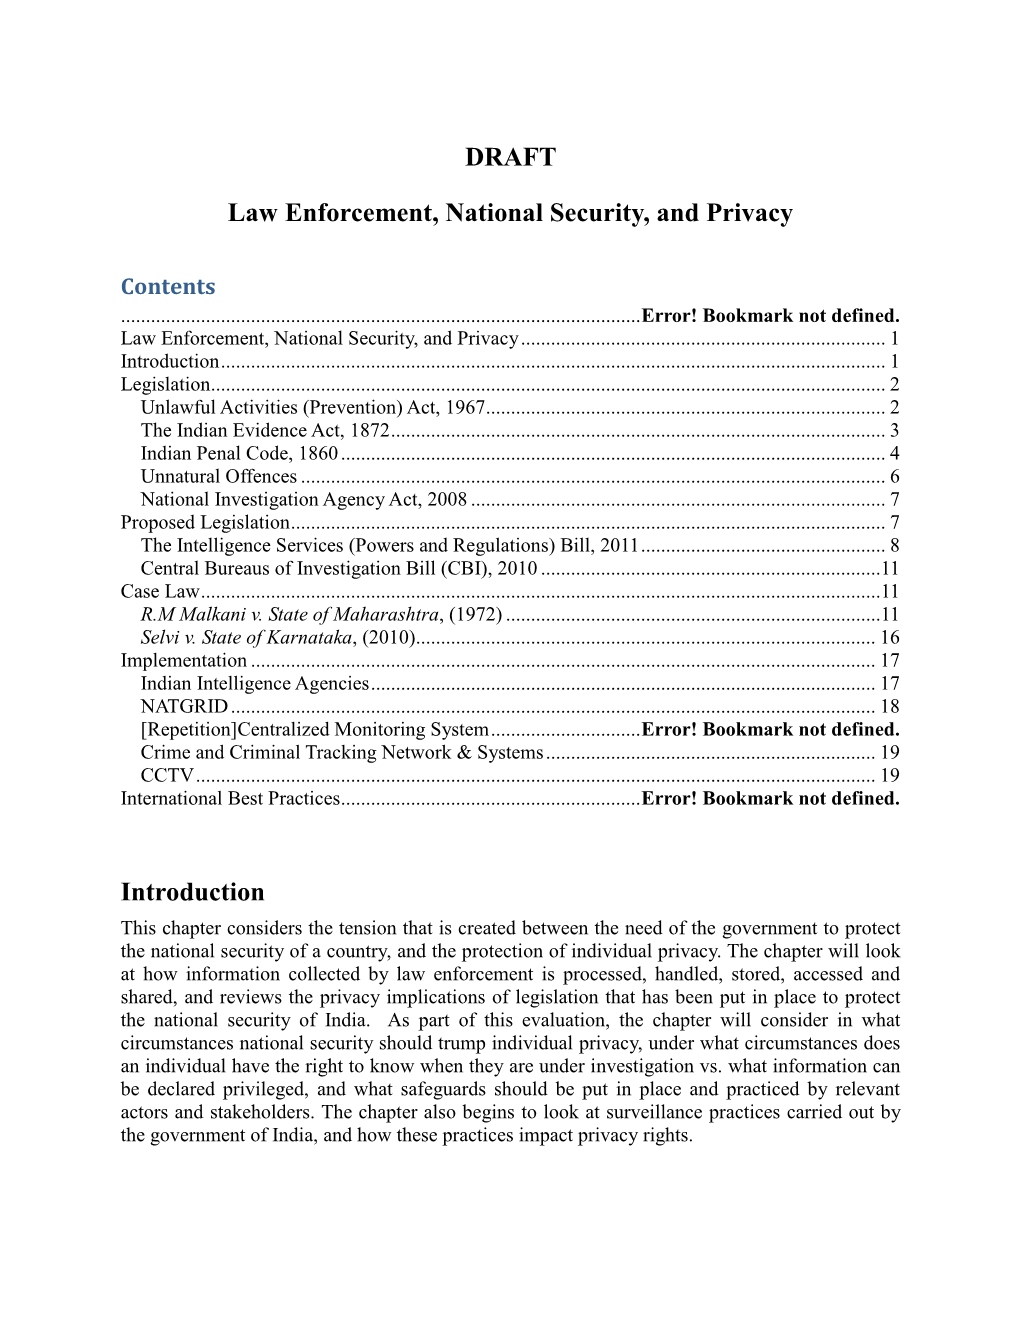 DRAFT Law Enforcement, National Security, and Privacy Introduction